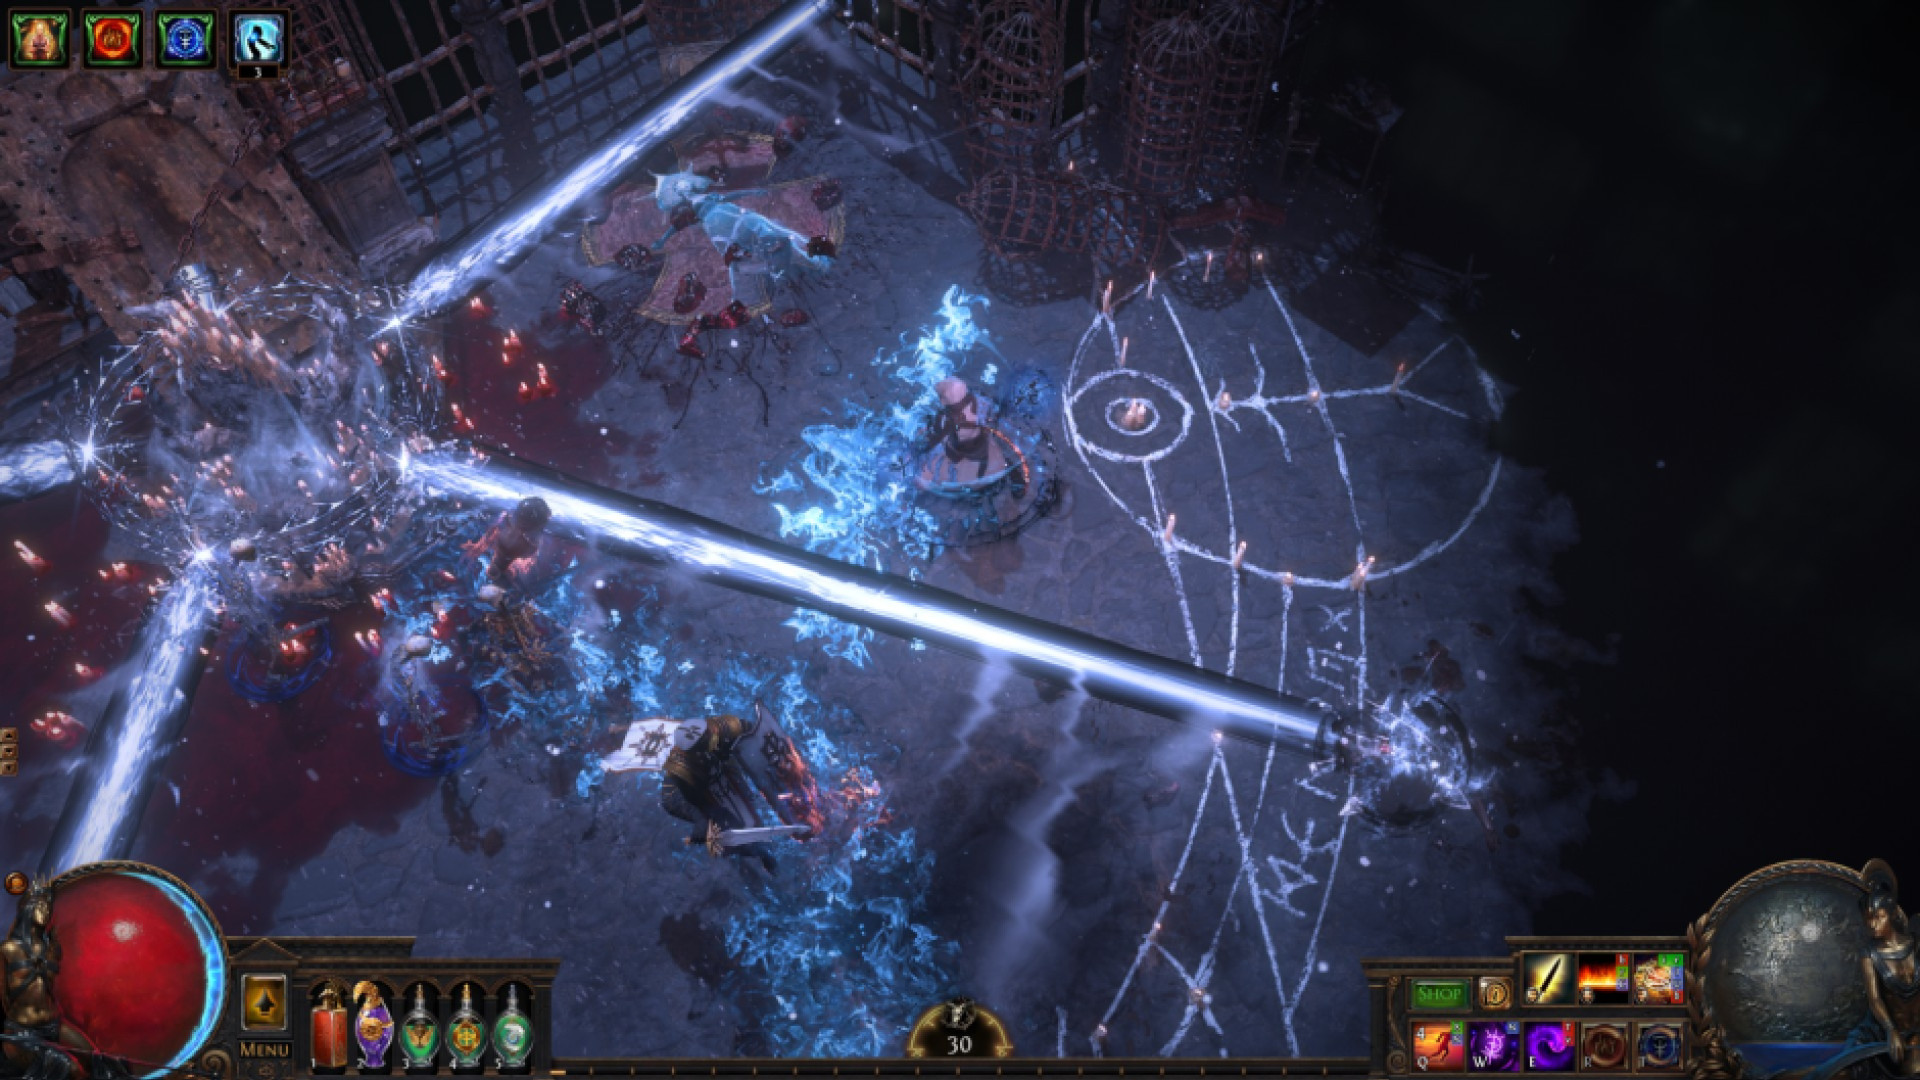 Path of Exile: Echoes of the Atlas